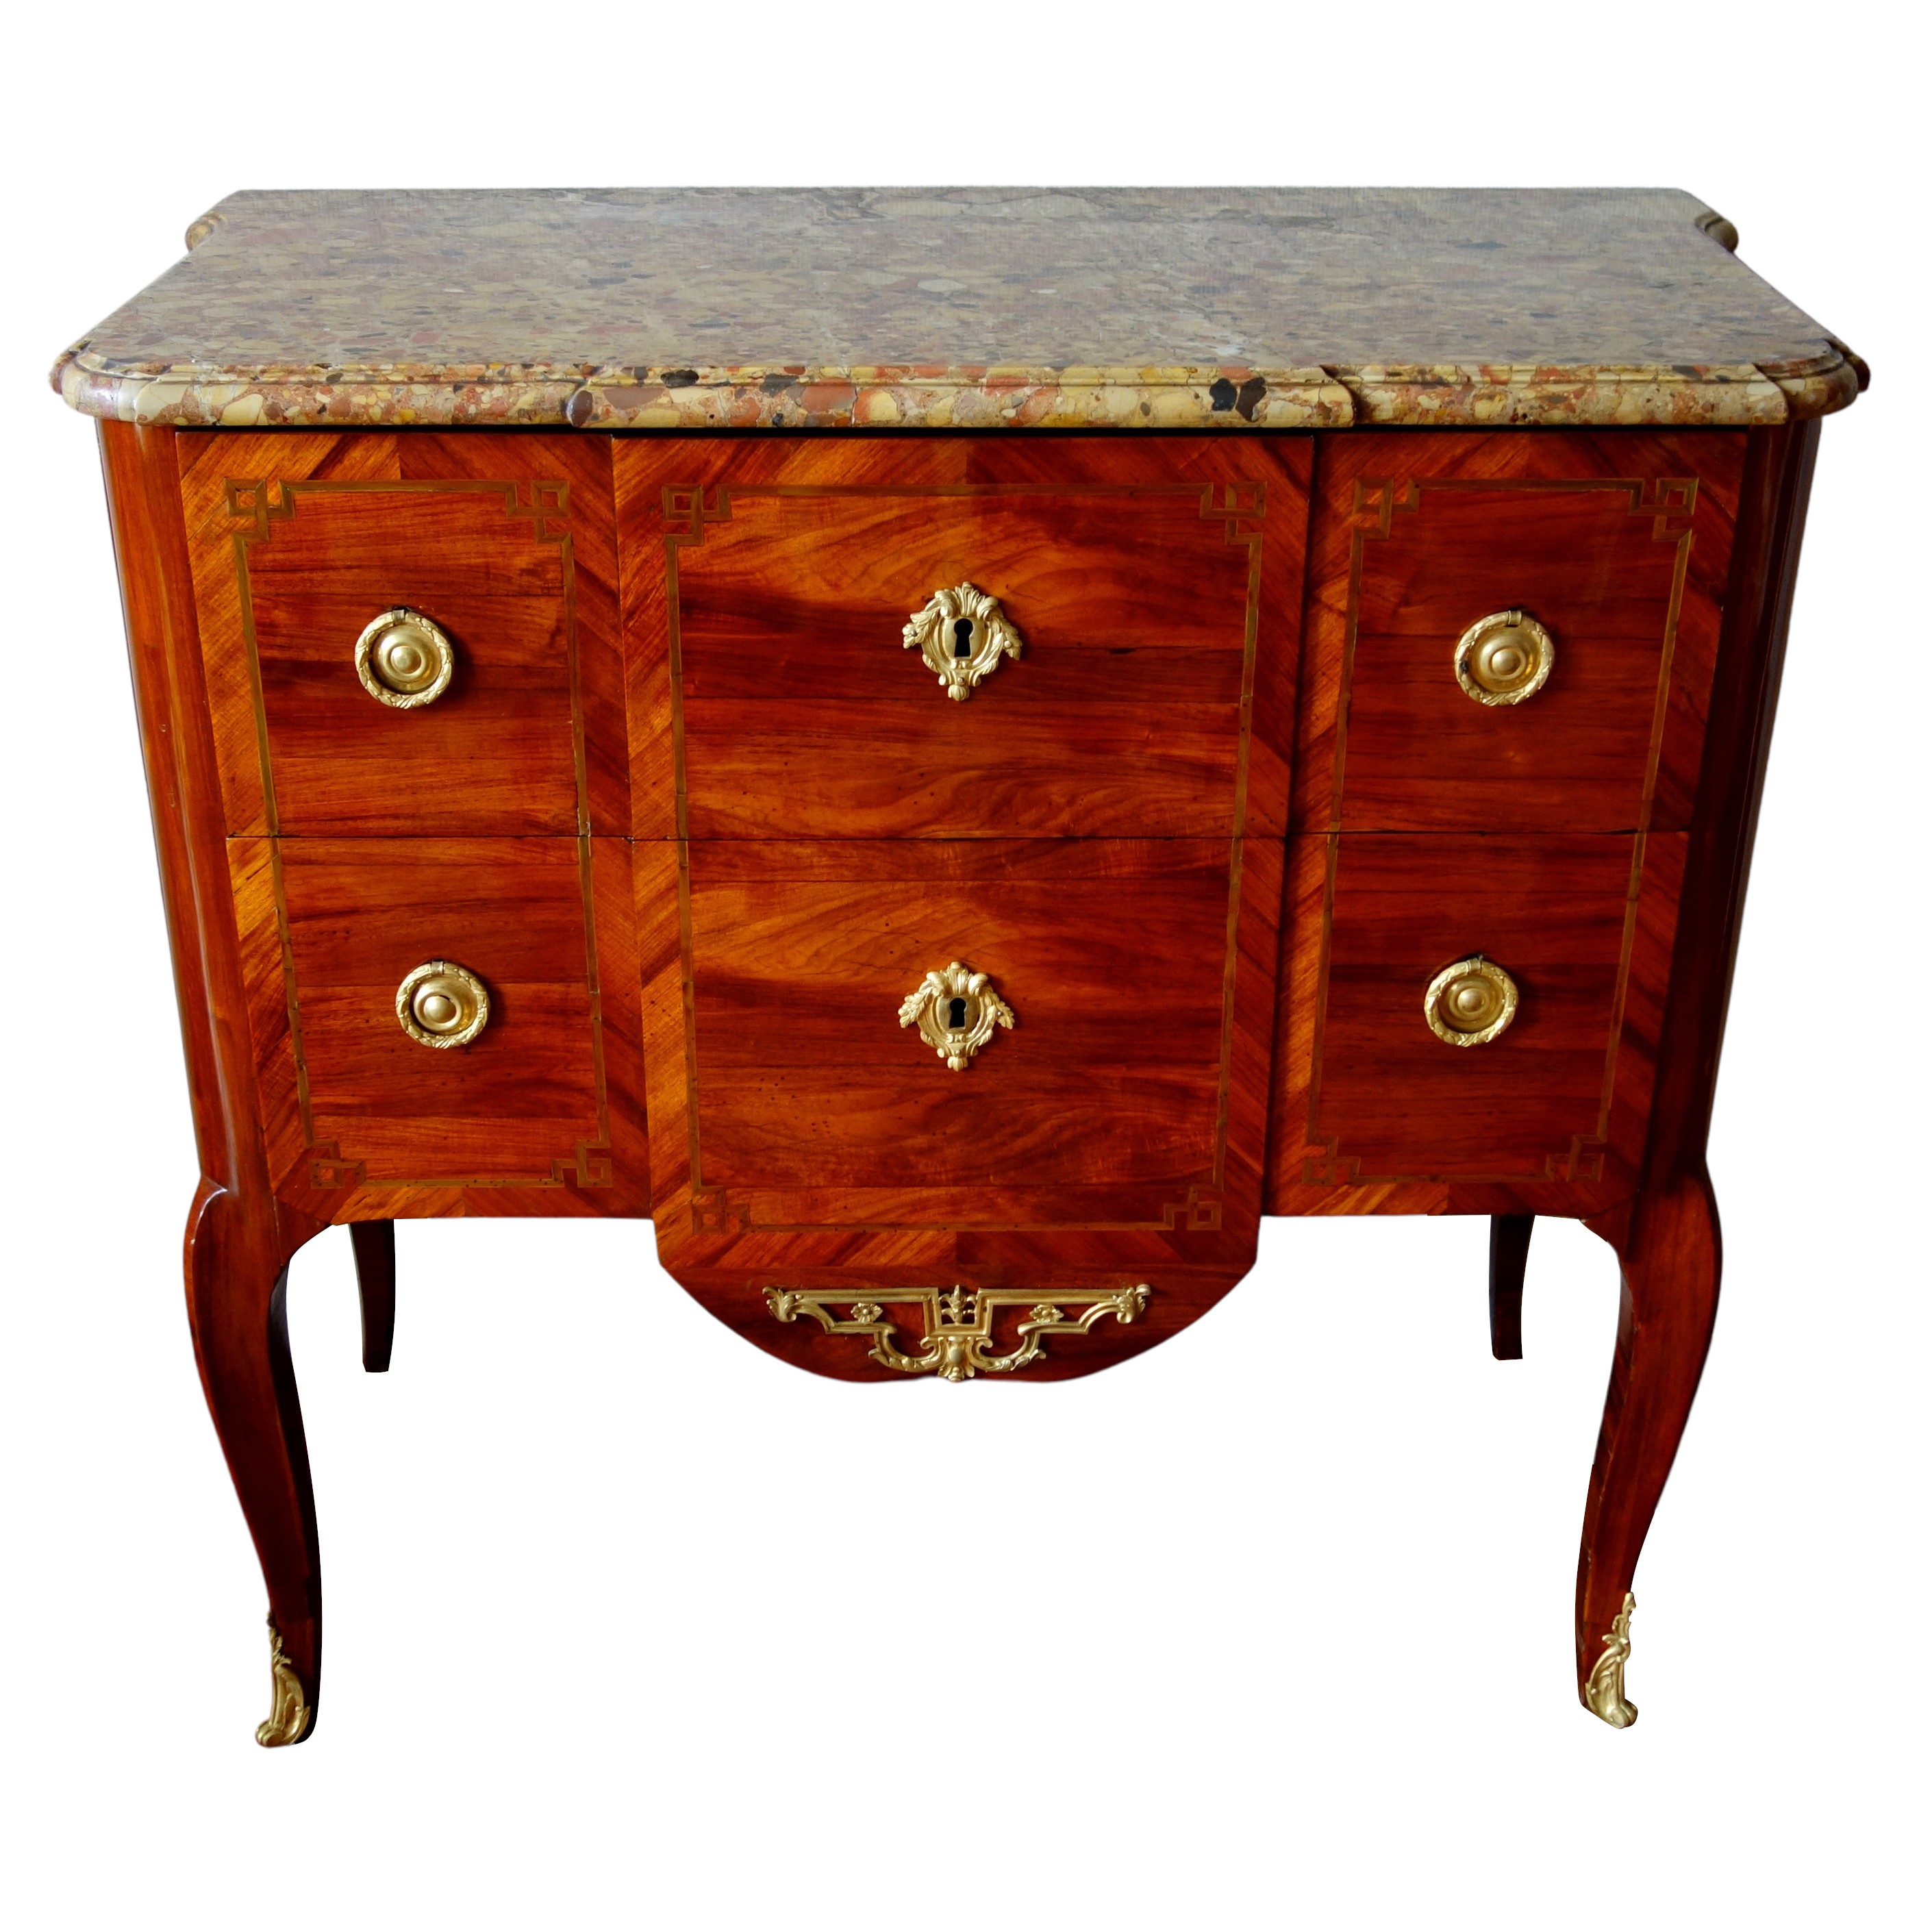 Guillaume Kemp : Transition rosewood chest of drawers / commode, signed